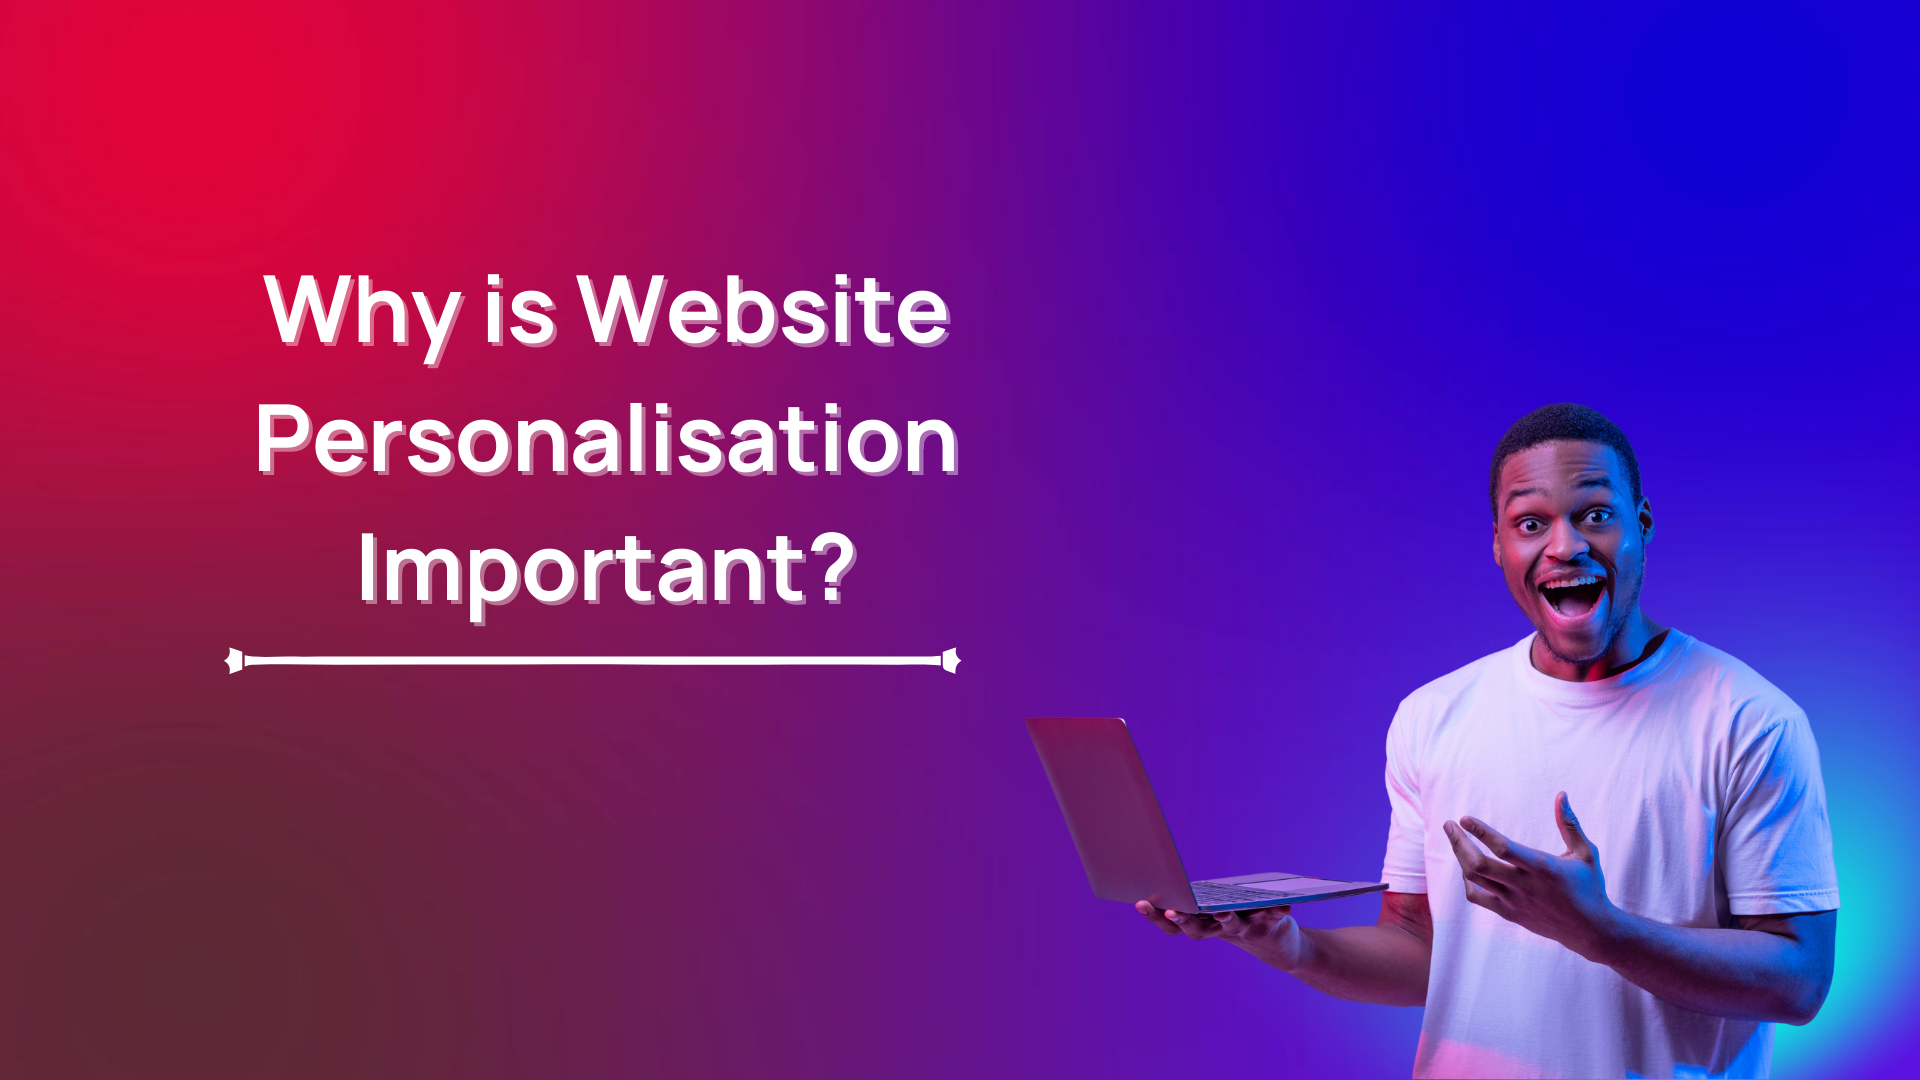 Why is Website Personalisation Important?